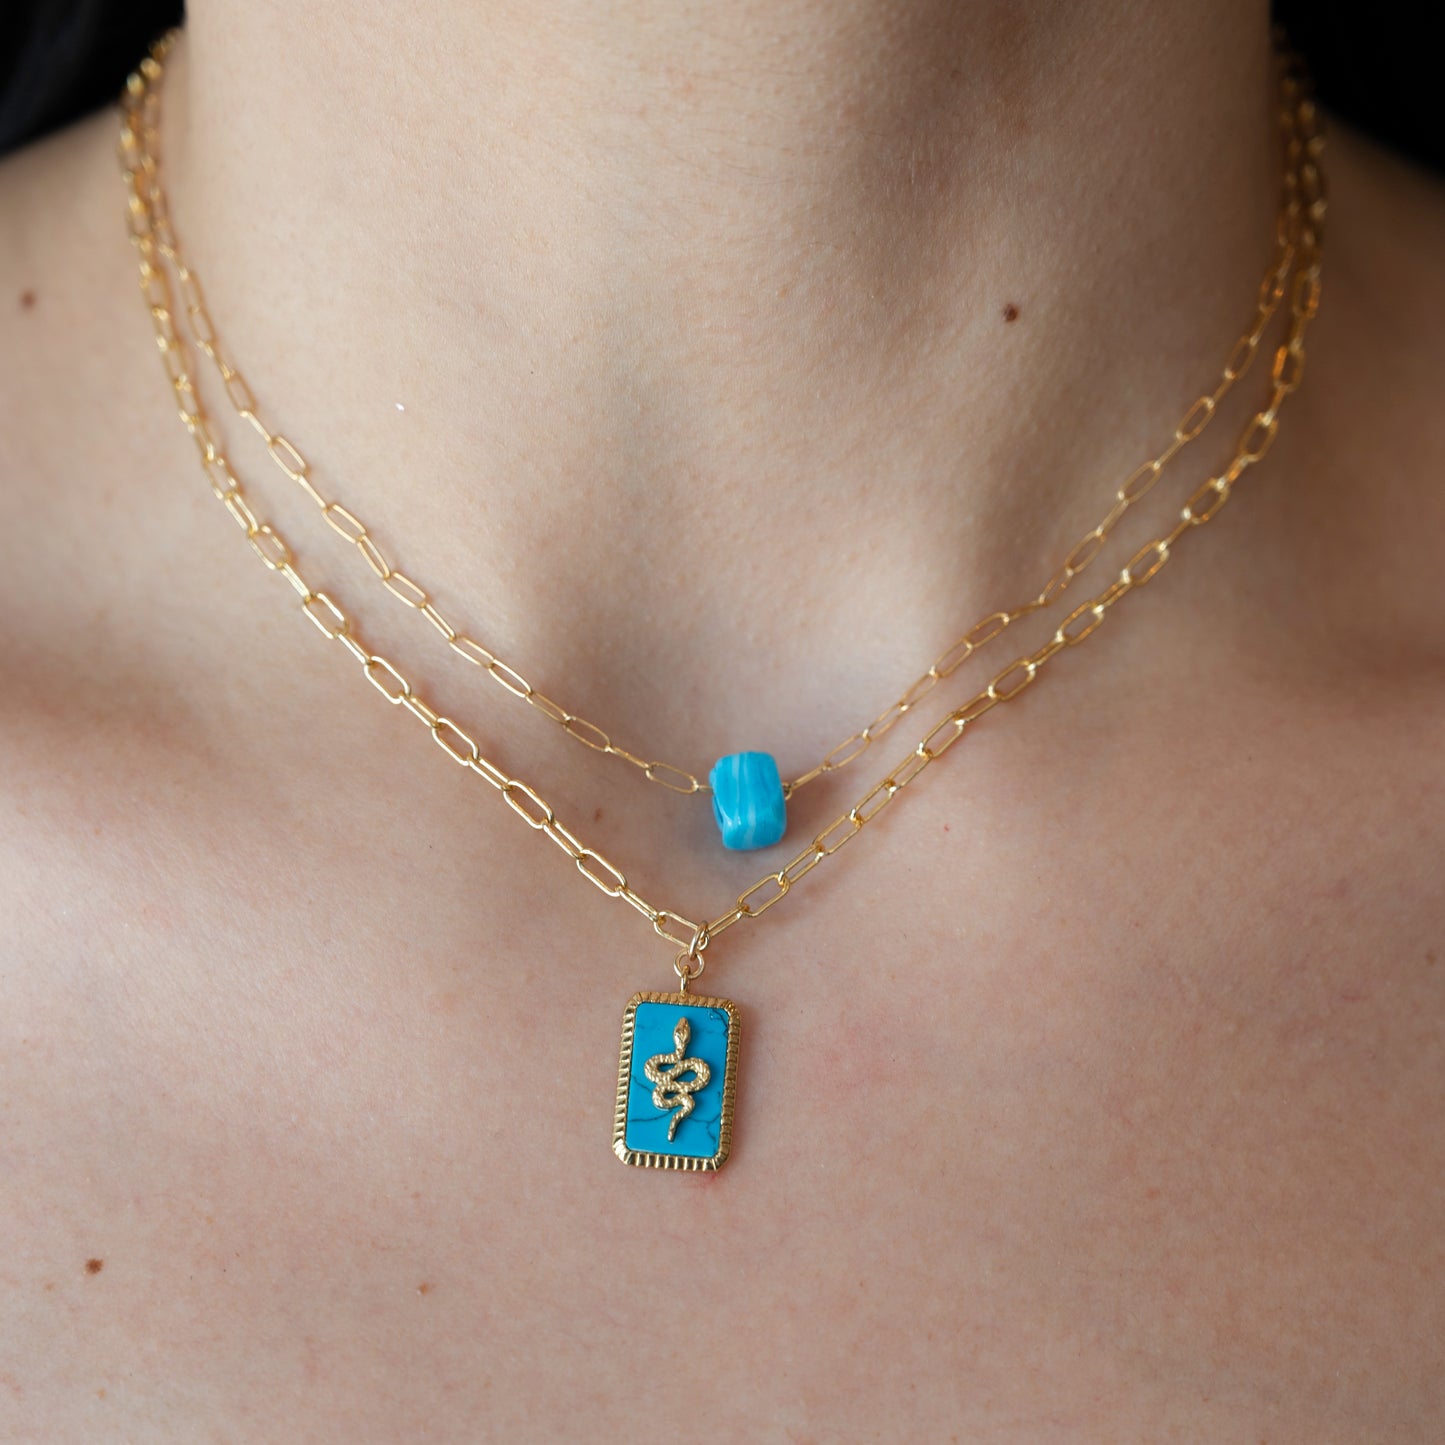 The Blue Cube Bead Necklace - Gold Chain